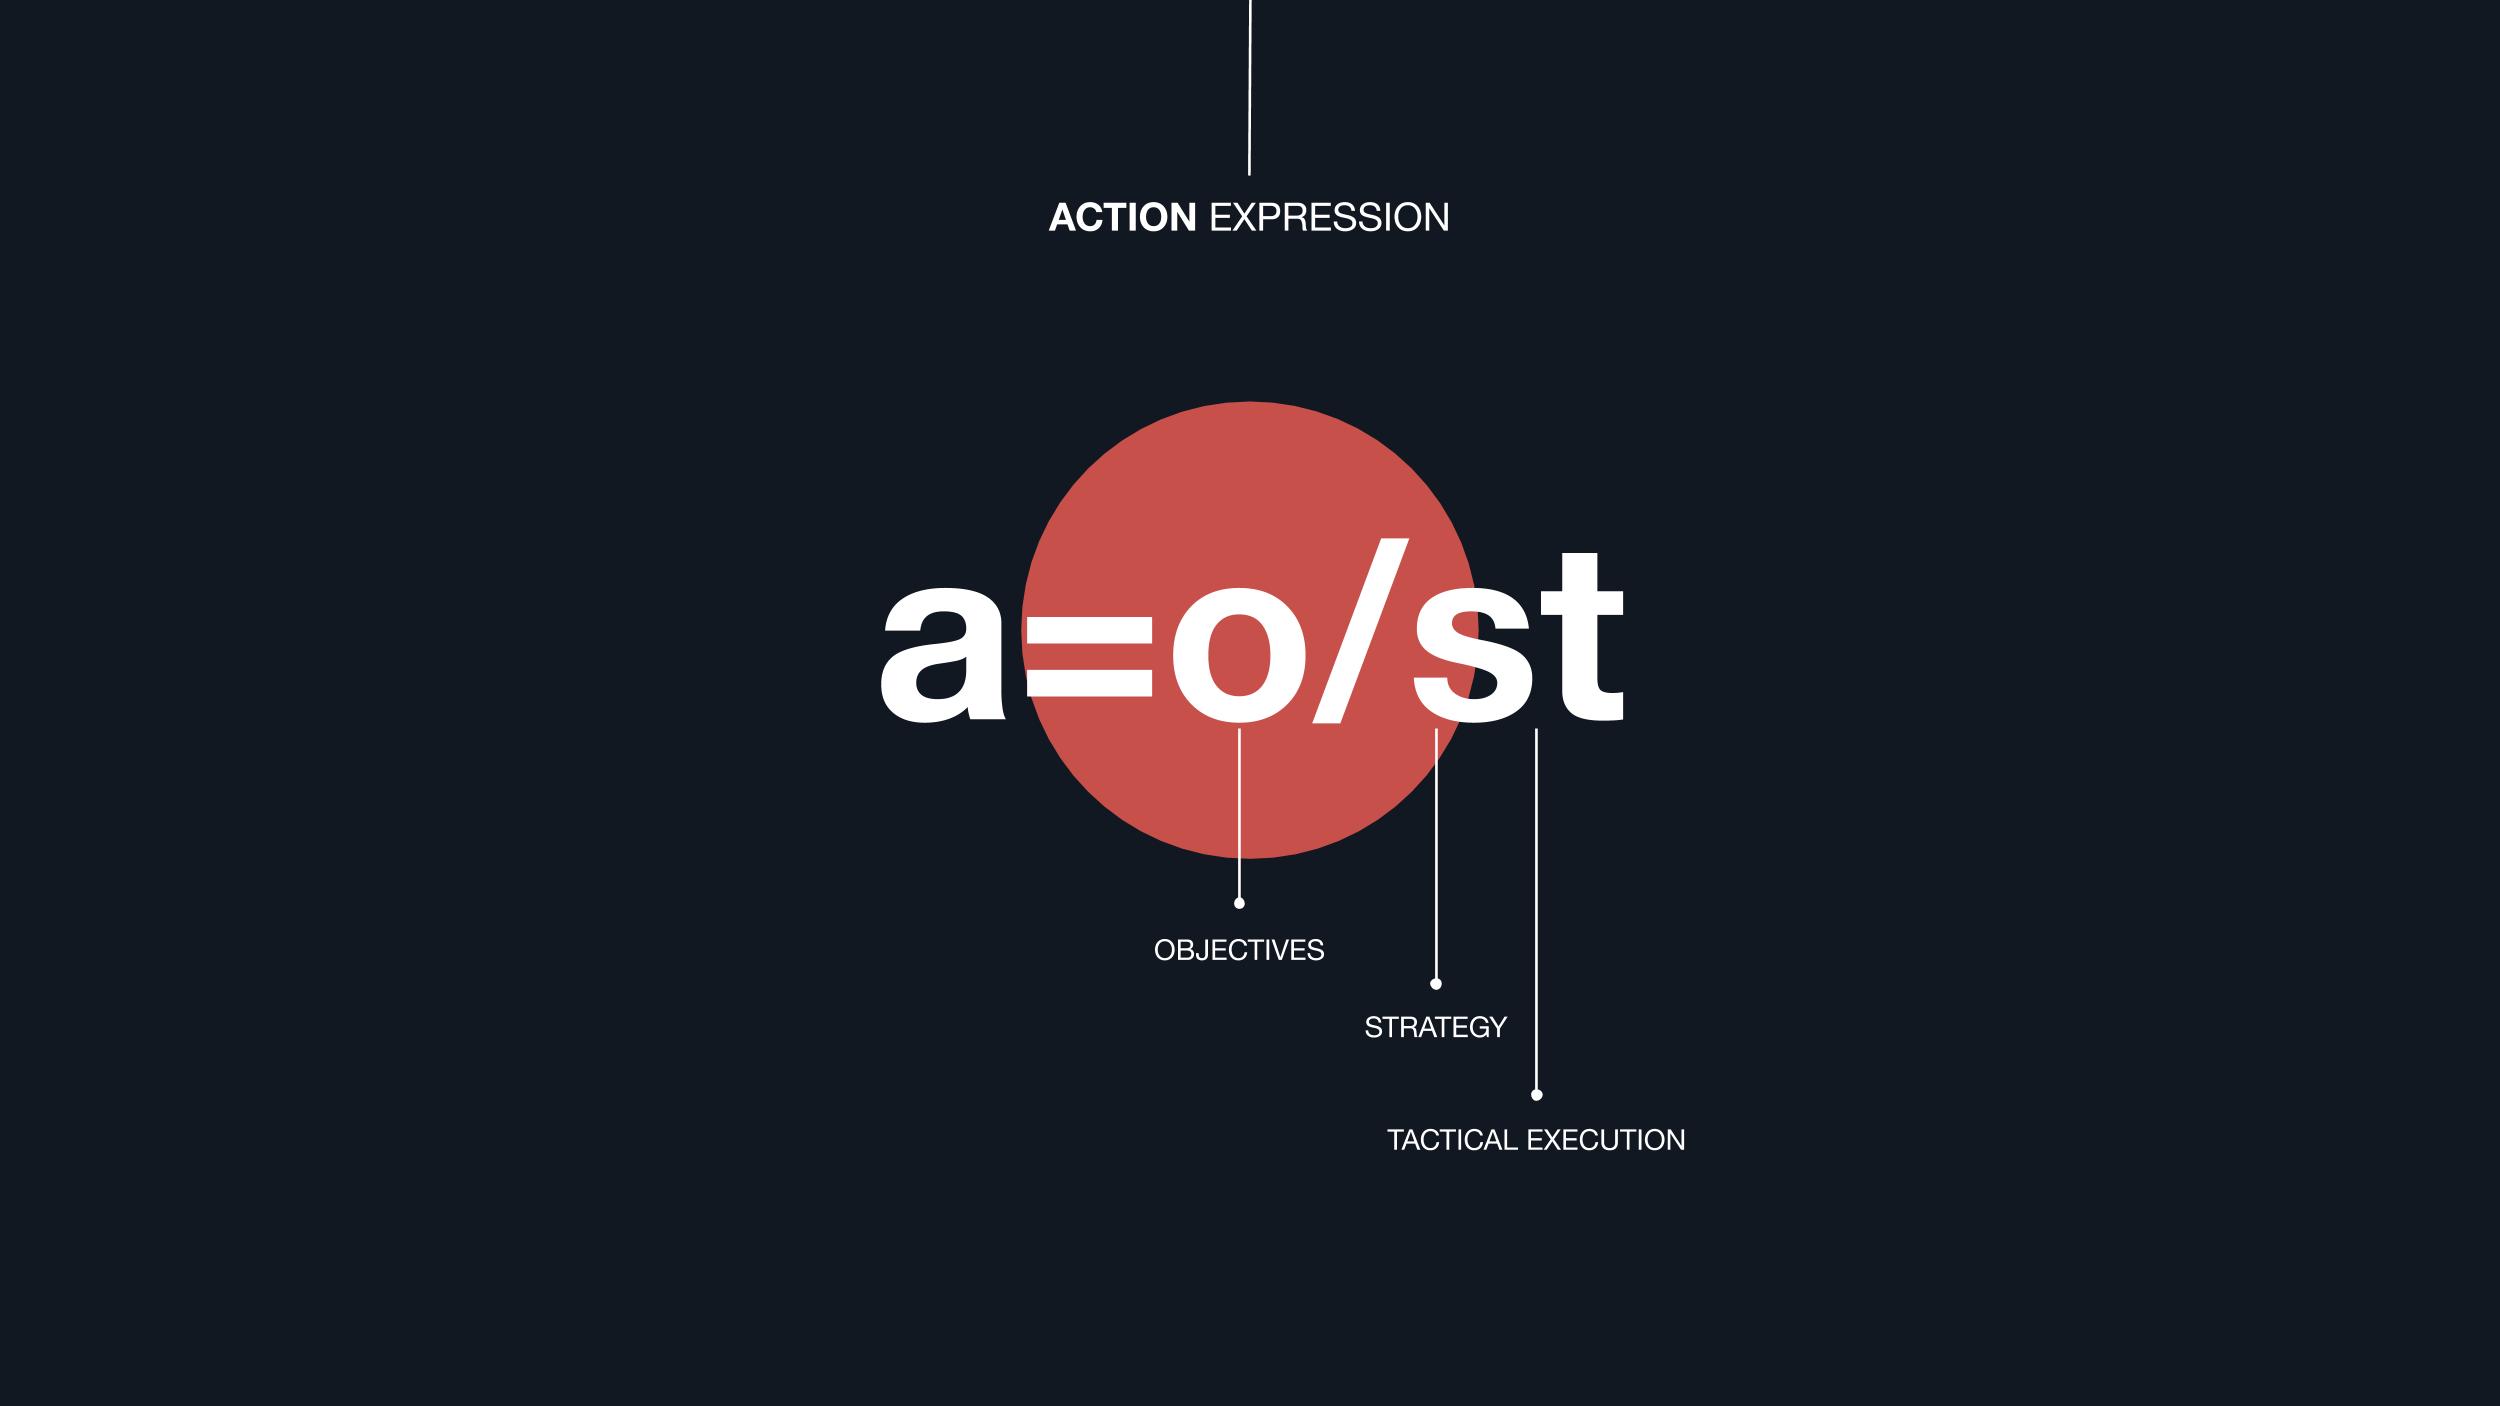 Action Expression - Growth Marketing